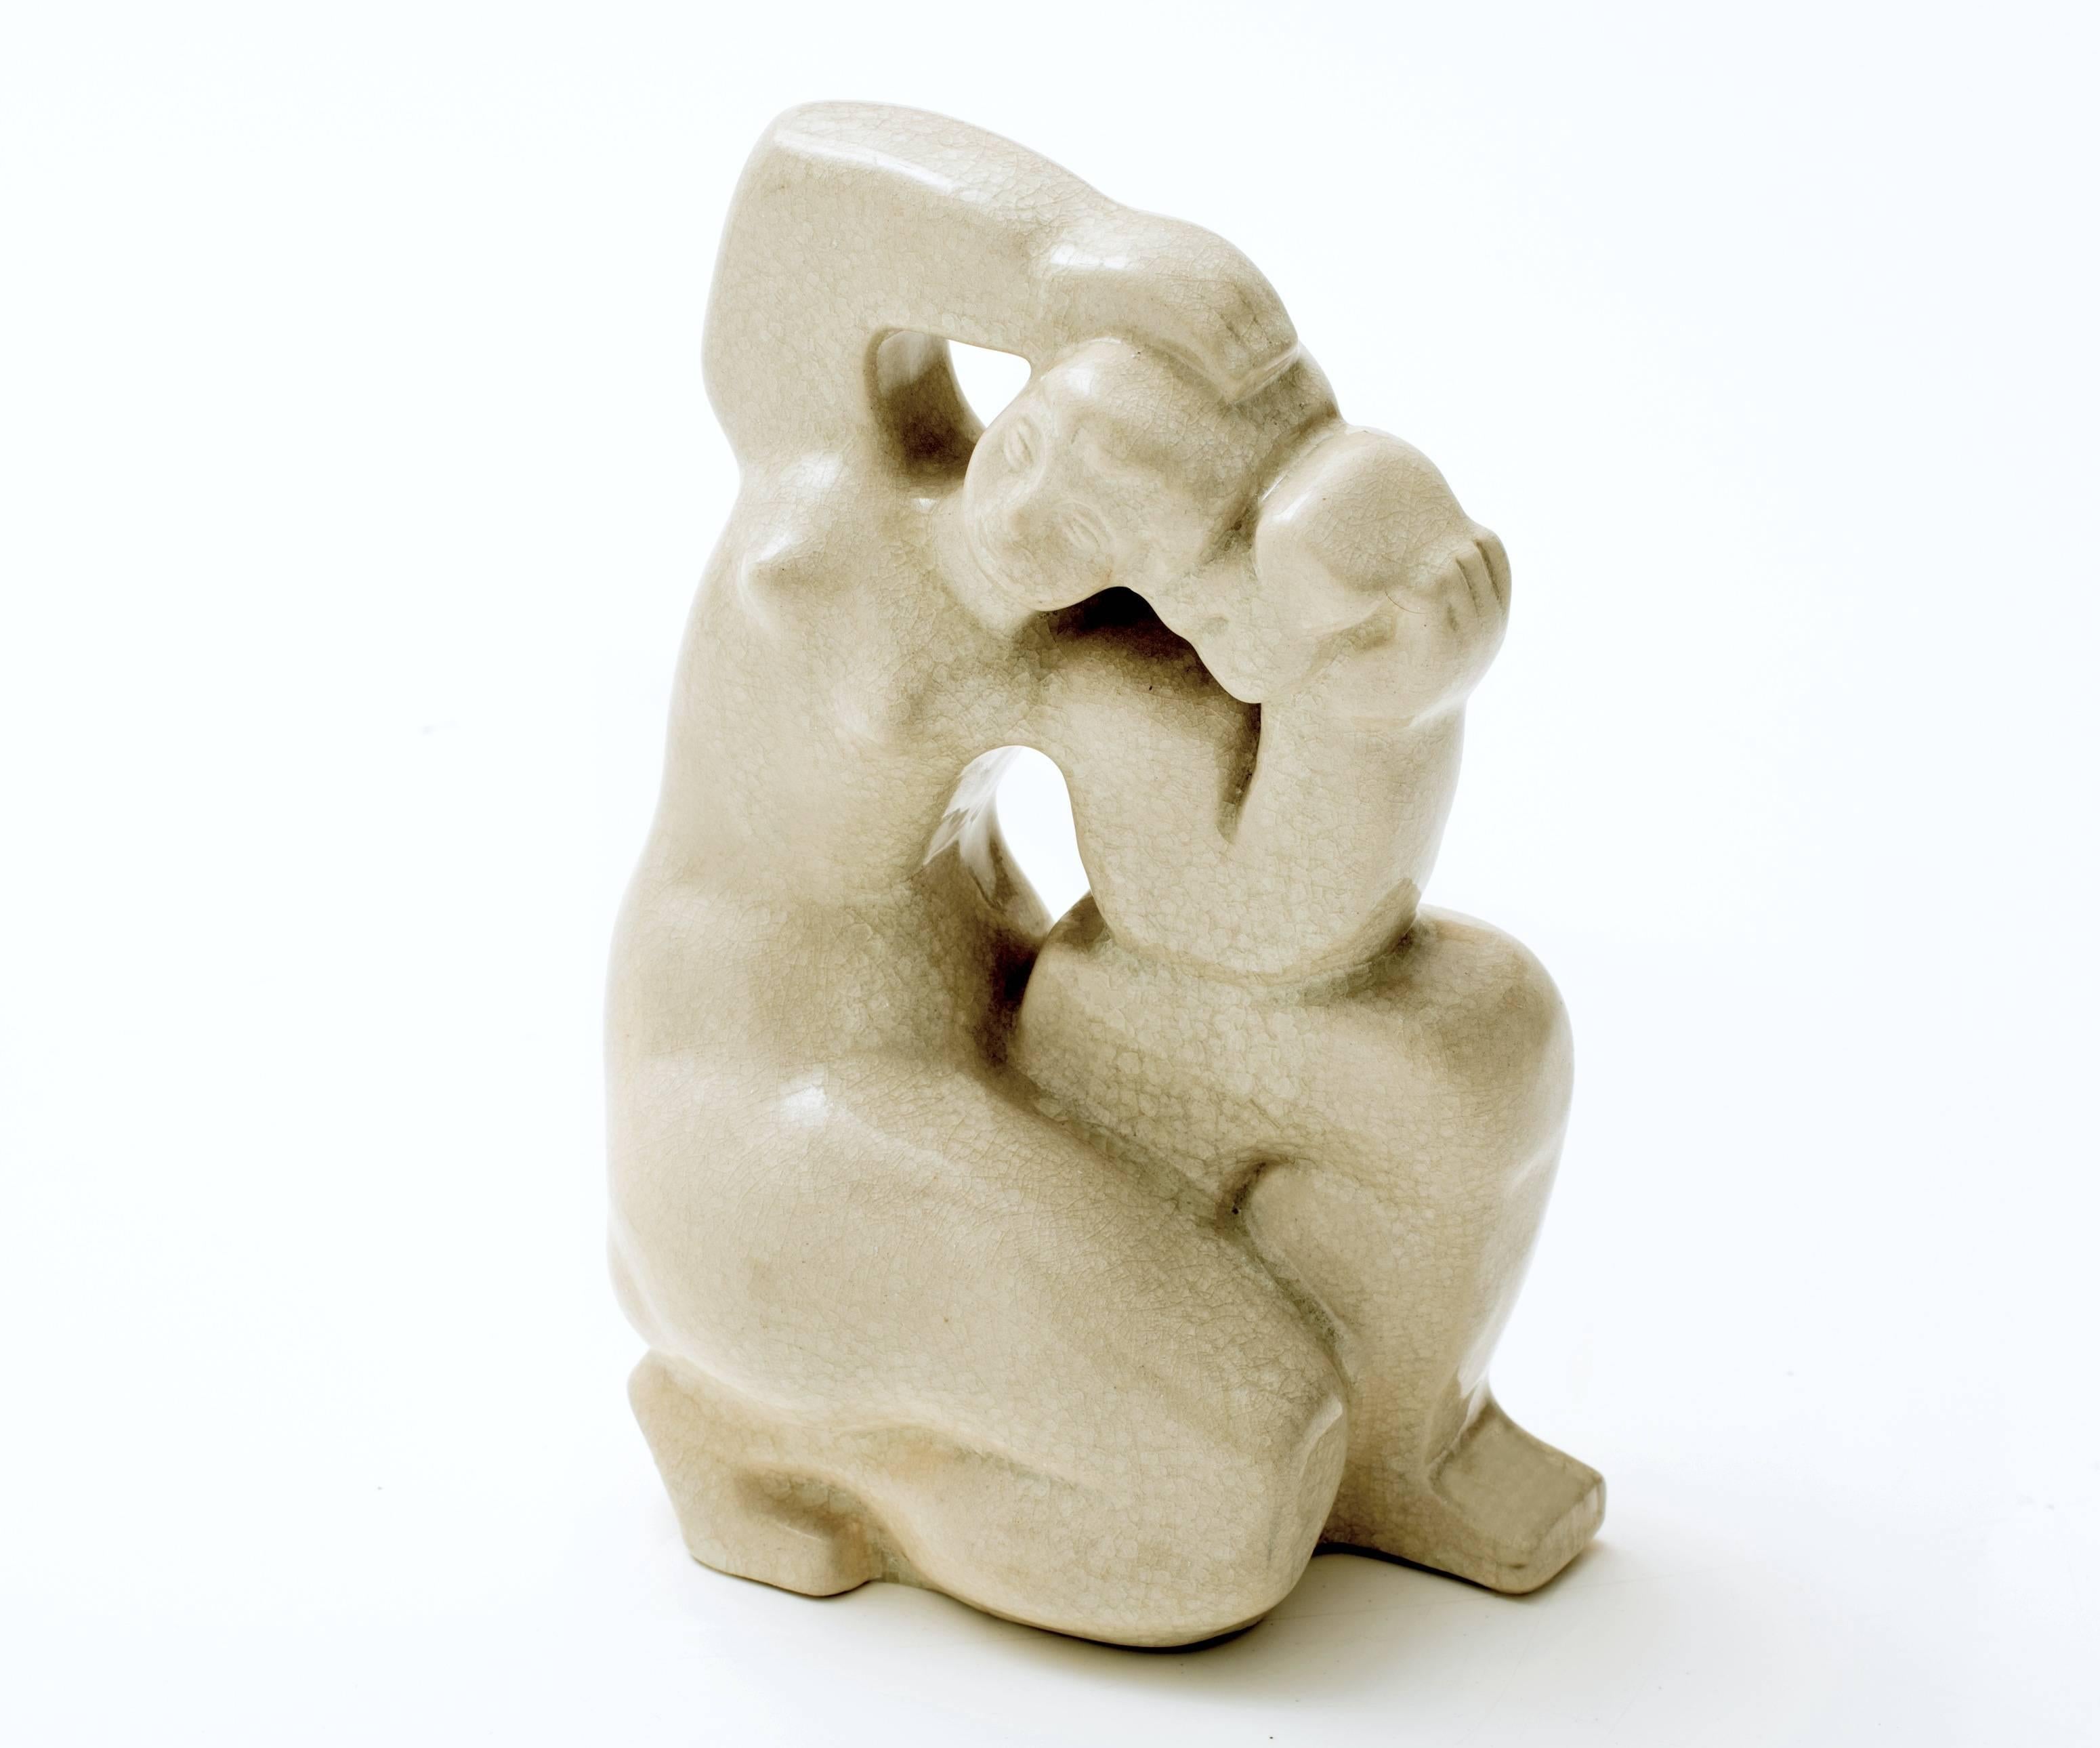 Rare and fabulous Cubist ceramic sculpture by Romanian artist Maximilian Schulmann (1912-1982). In the style of Lemanceau and Edouard Cazaux, this crackle glaze finish of a nude female holding her hair has that great cubist chunkiness while the back